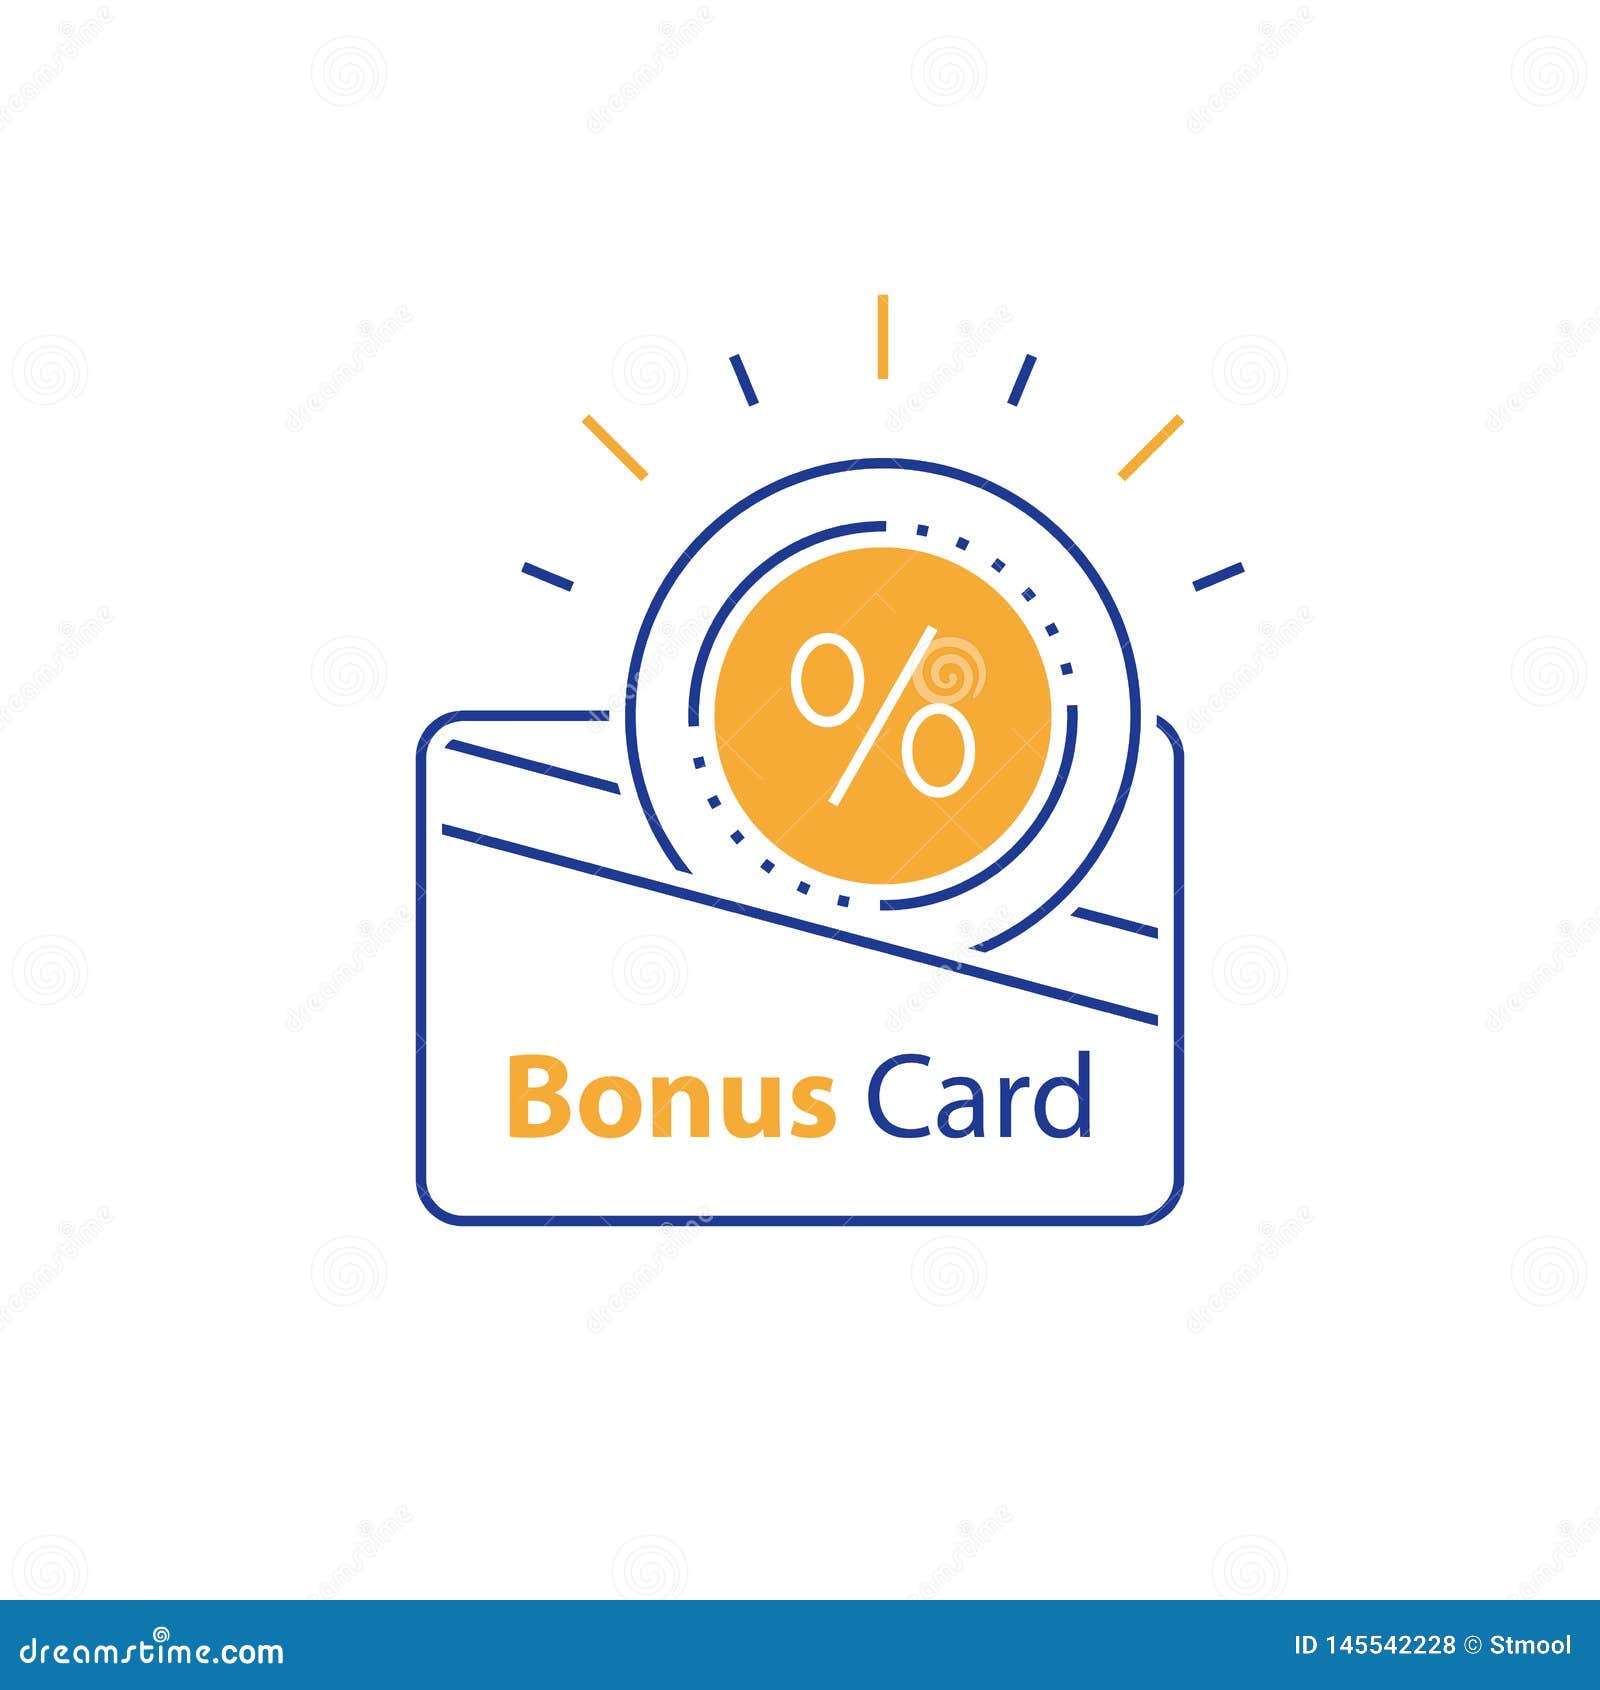 earn reward, loyalty card, incentive gift, collecting bonus, shopping perks, discount coupon, line icon